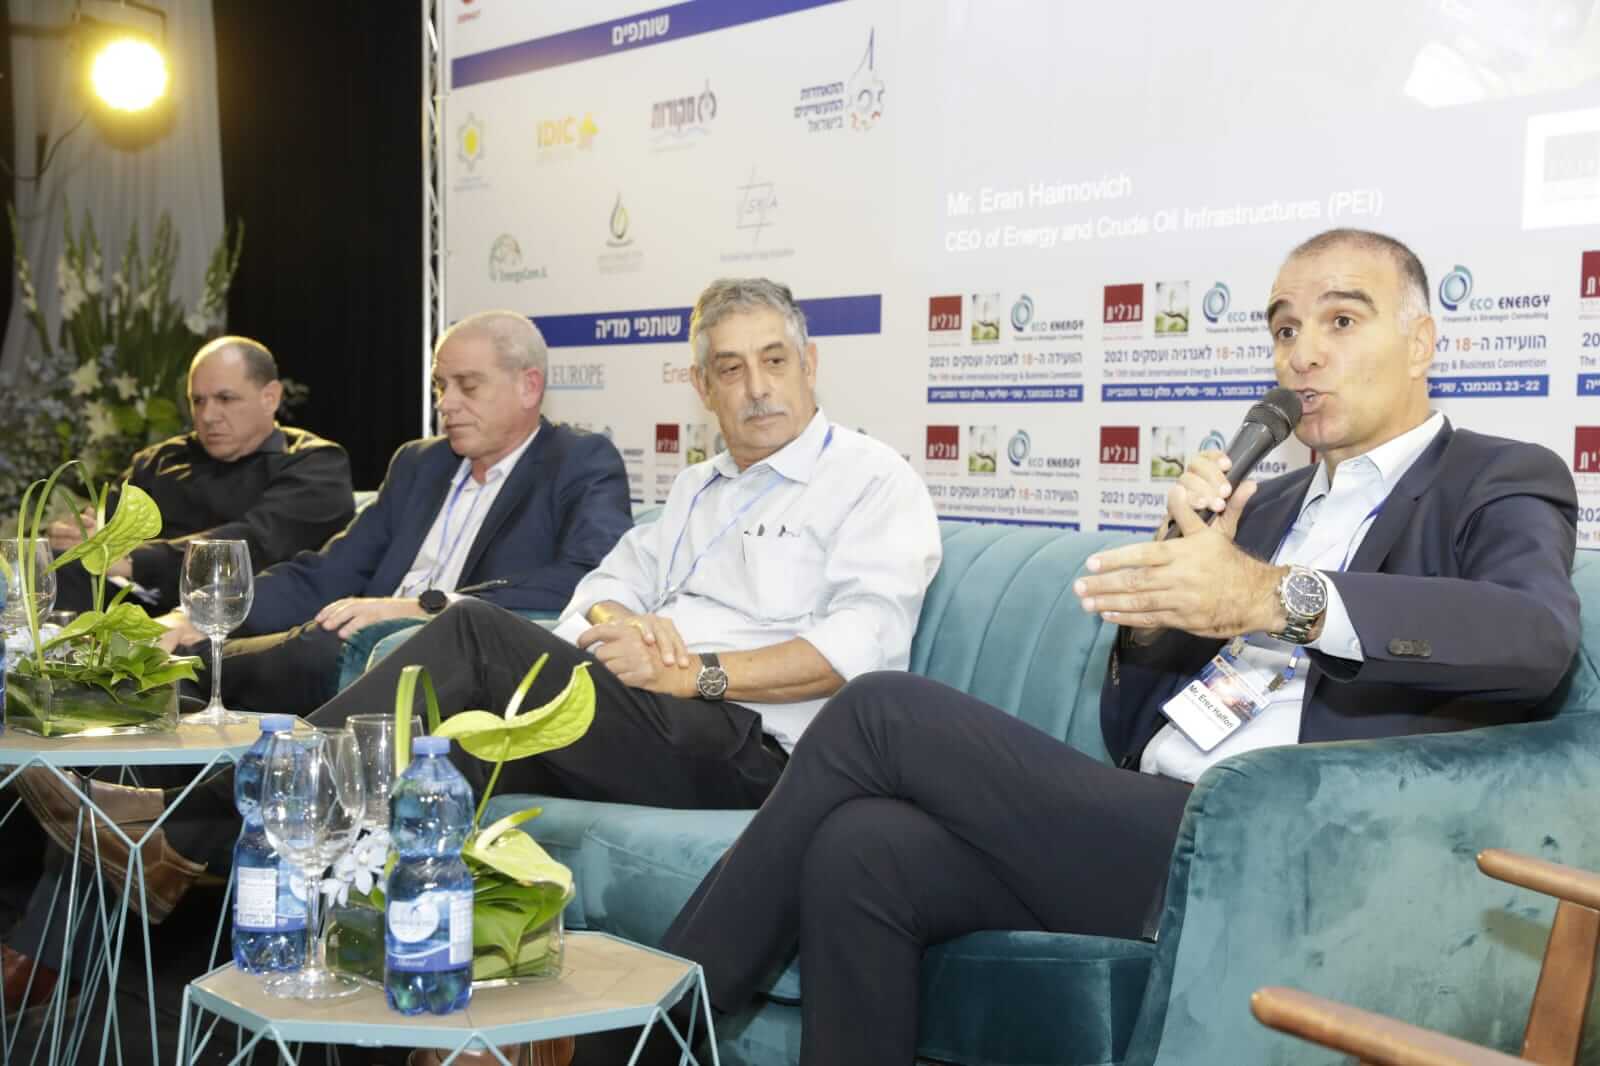 The head of the KSA, on the right, answers questions about the impact of the polluting company - photo by Yael Tzur